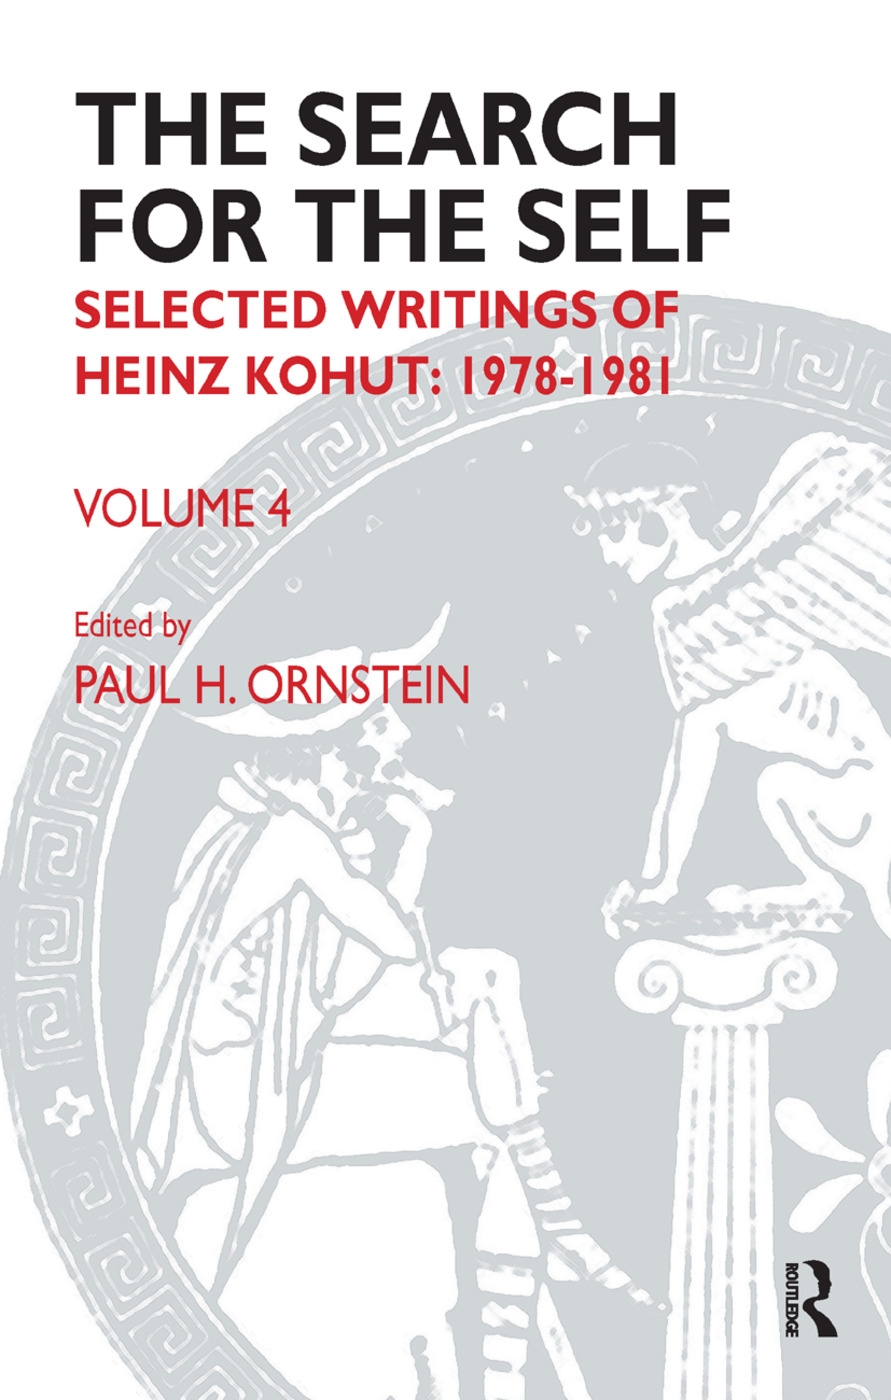 The Search for the Self: Selected Writings of Heinz Kohut: 1978-1981